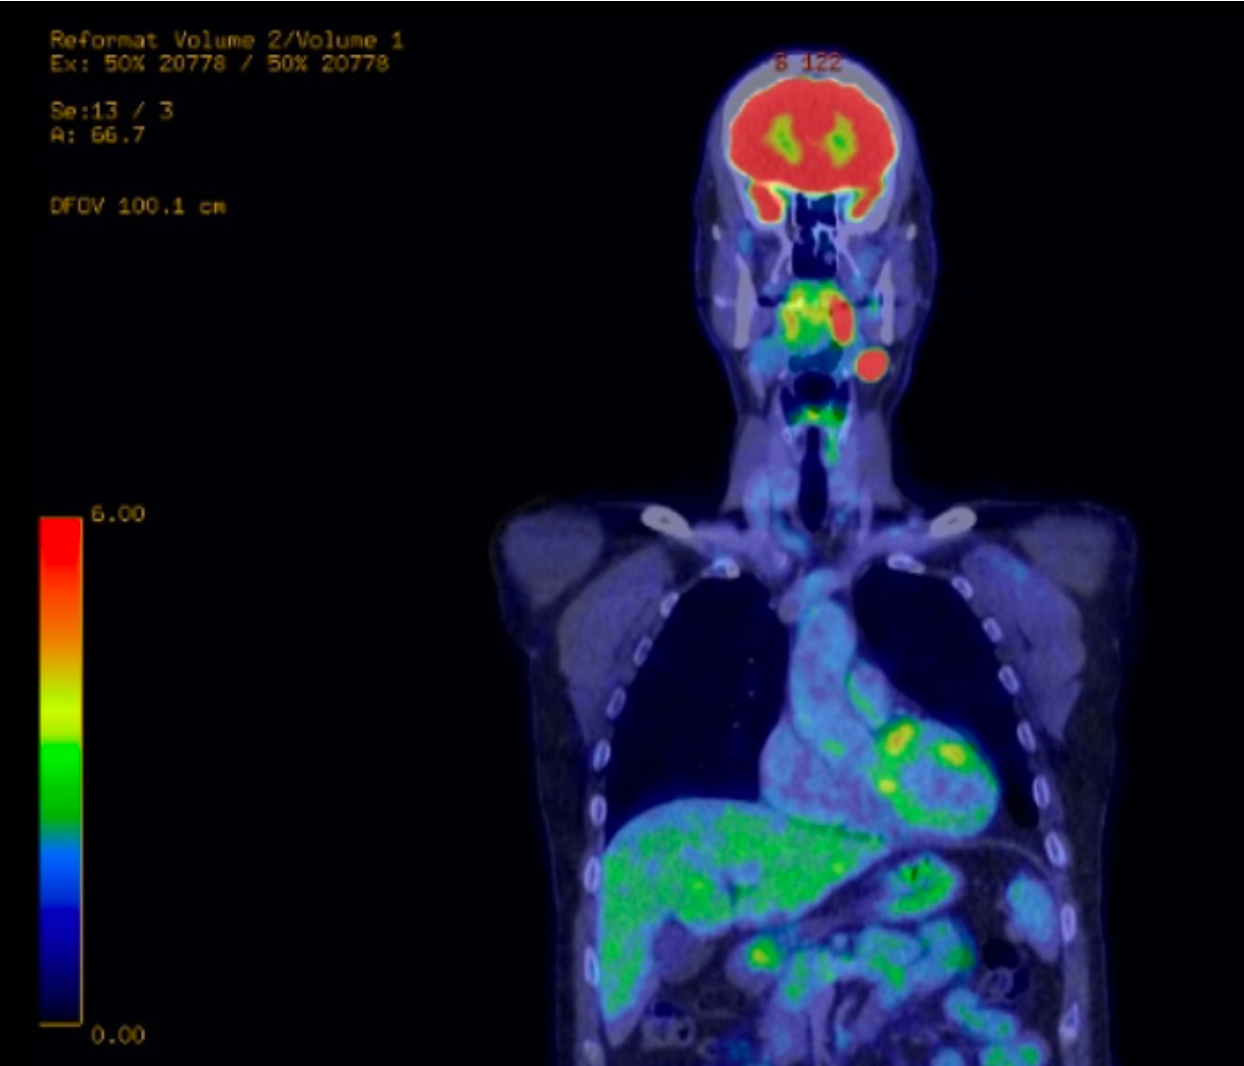 Coronal PET scan of the patient’s head, neck, and chest. Scan shows high FDG uptake in left palatine tonsil and adjacent neck nodes with no visible metastases.